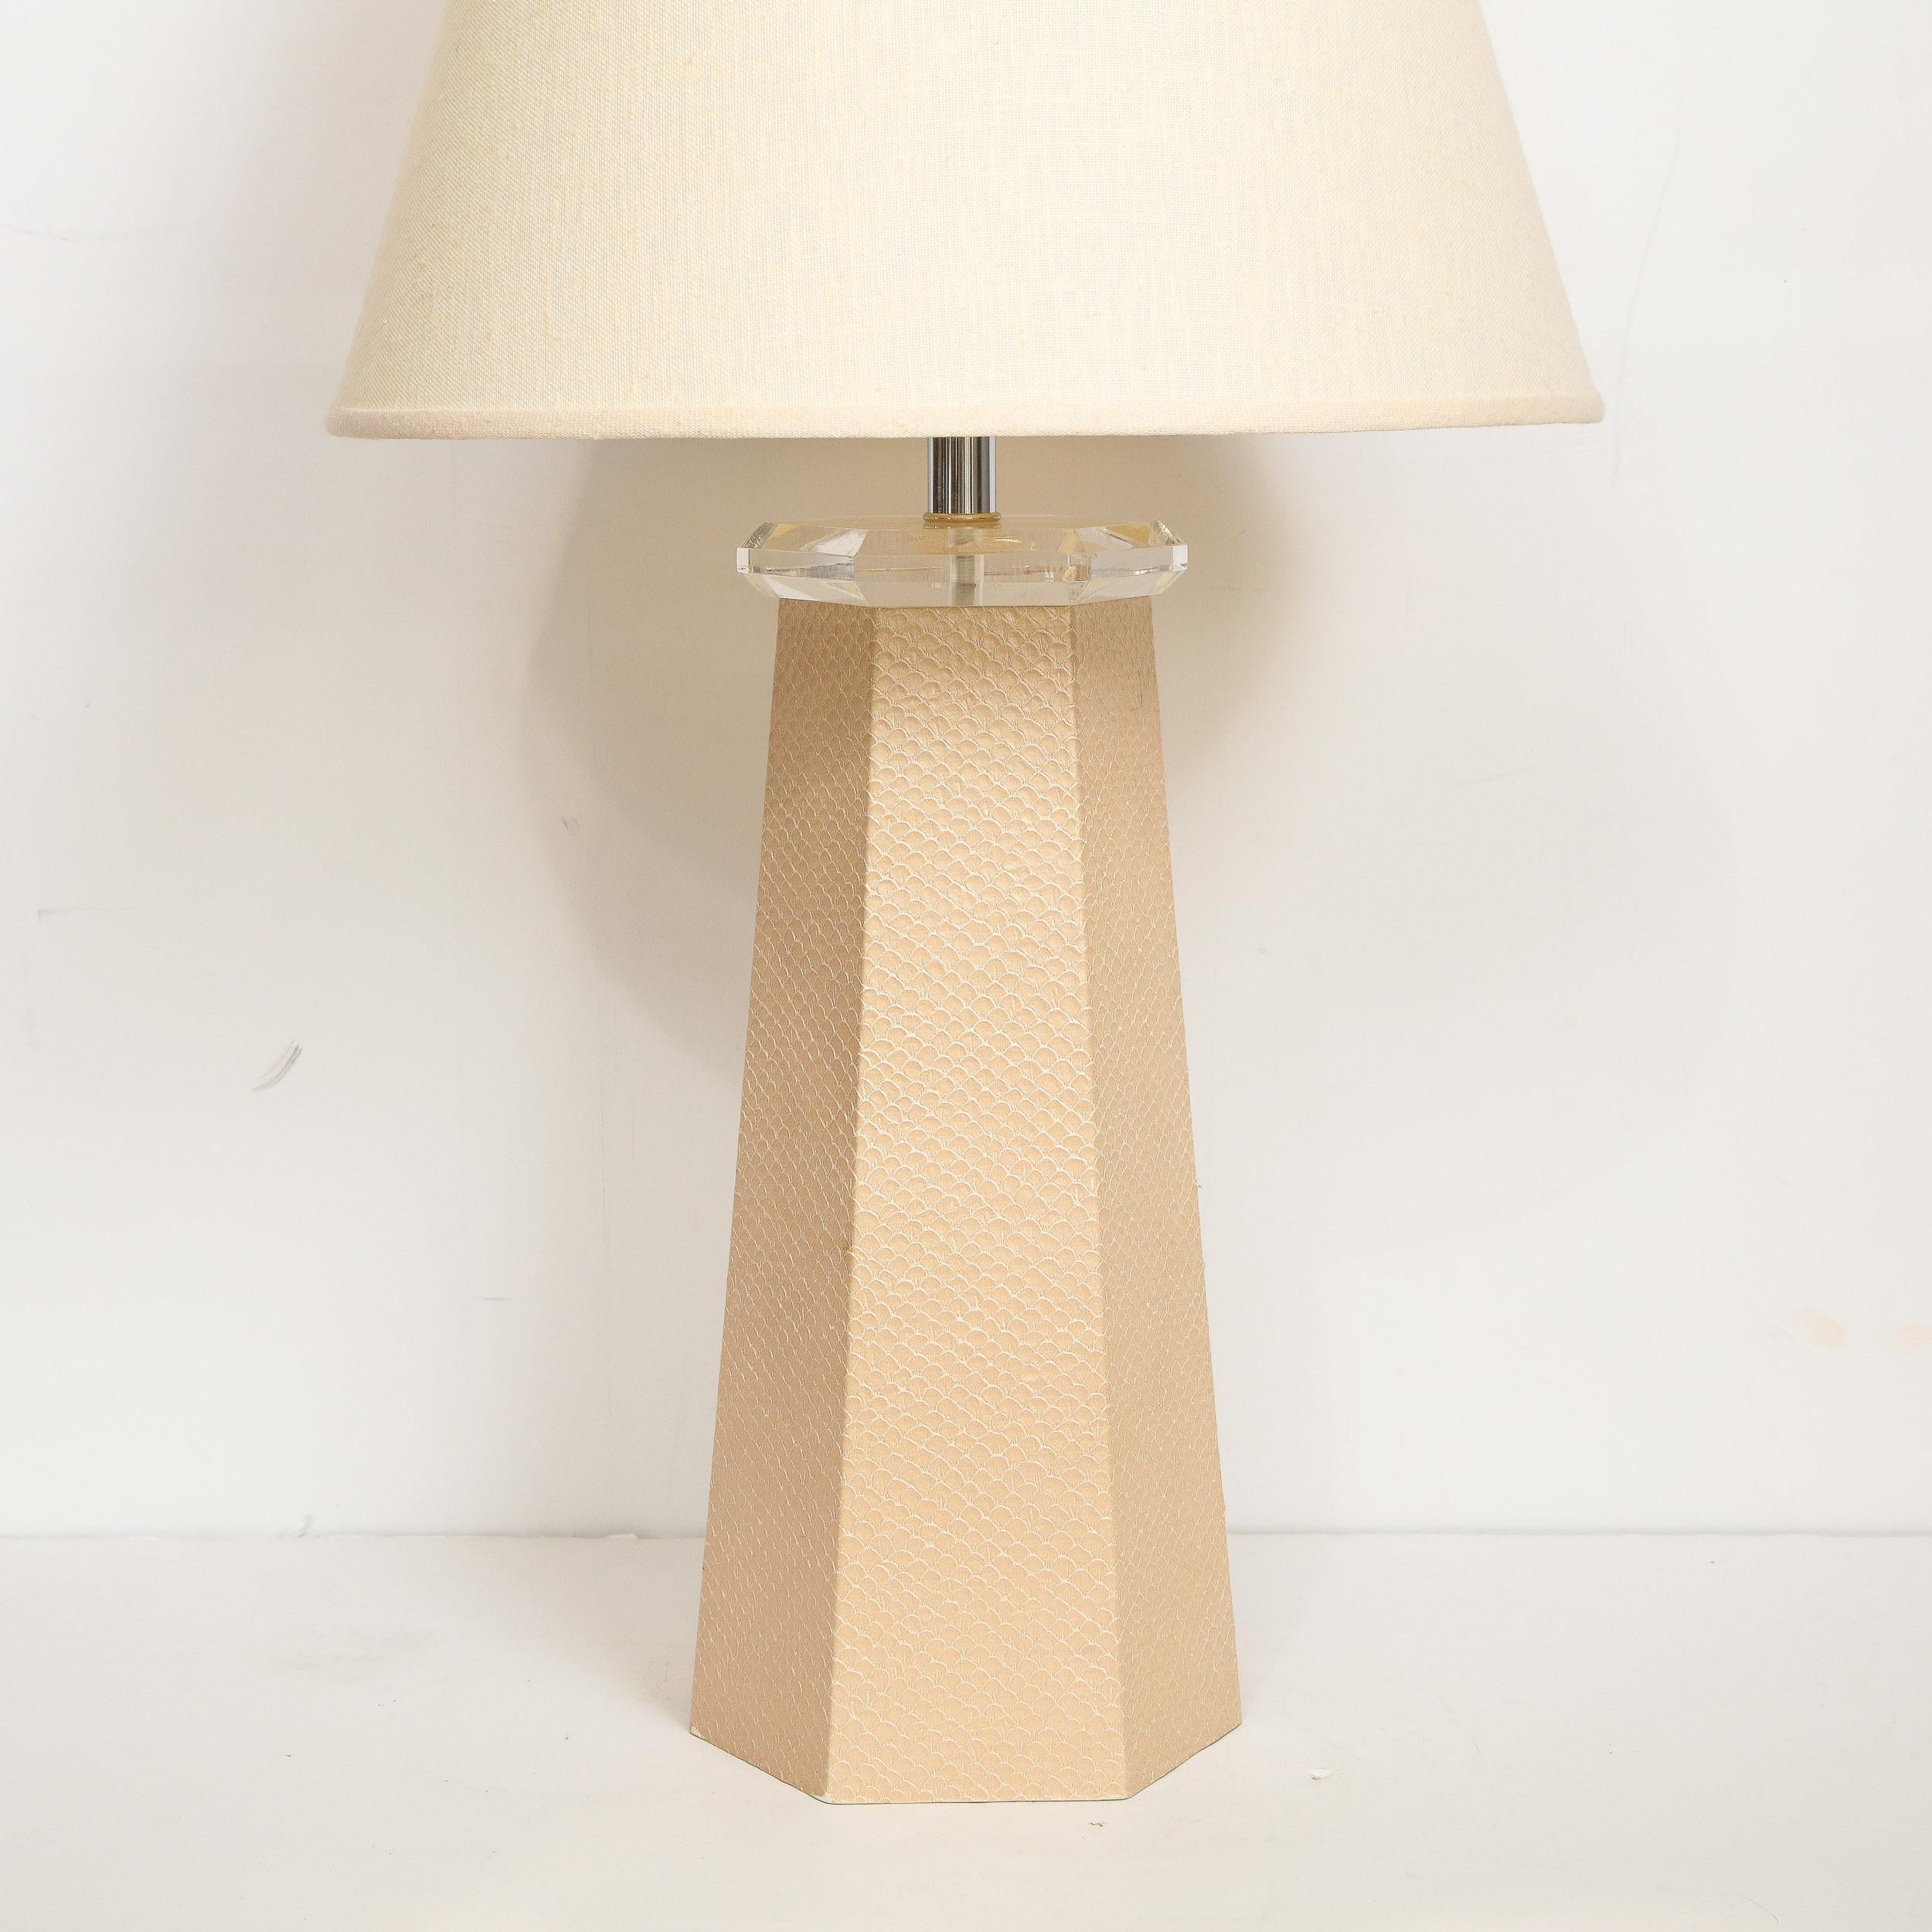 This refined table lamp was designed by Karl Springer, circa 1980, and realized in the United States. Springer, who began his career by crafting small desktop accessories, took inspiration from the 1920s and 1930s and helped fuel the renewed